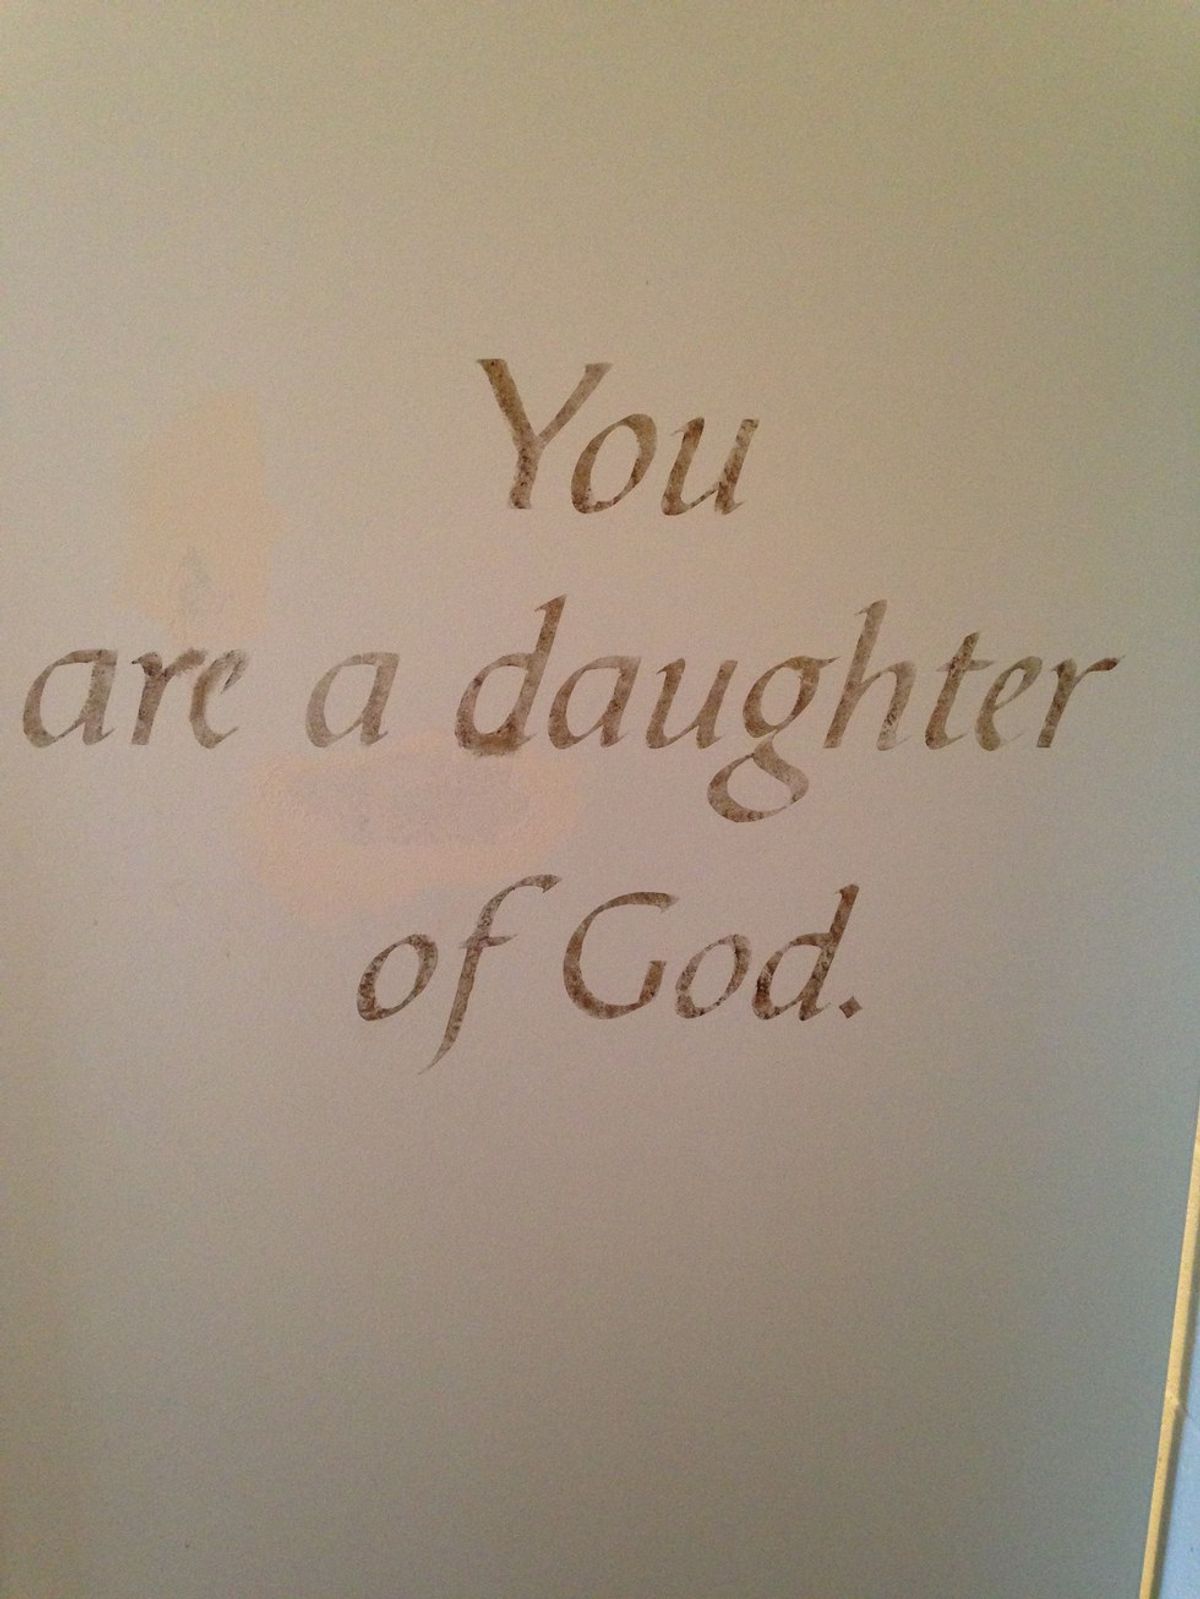 THE BATHROOM WALL READ: YOU ARE A DAUGHTER OF GOD